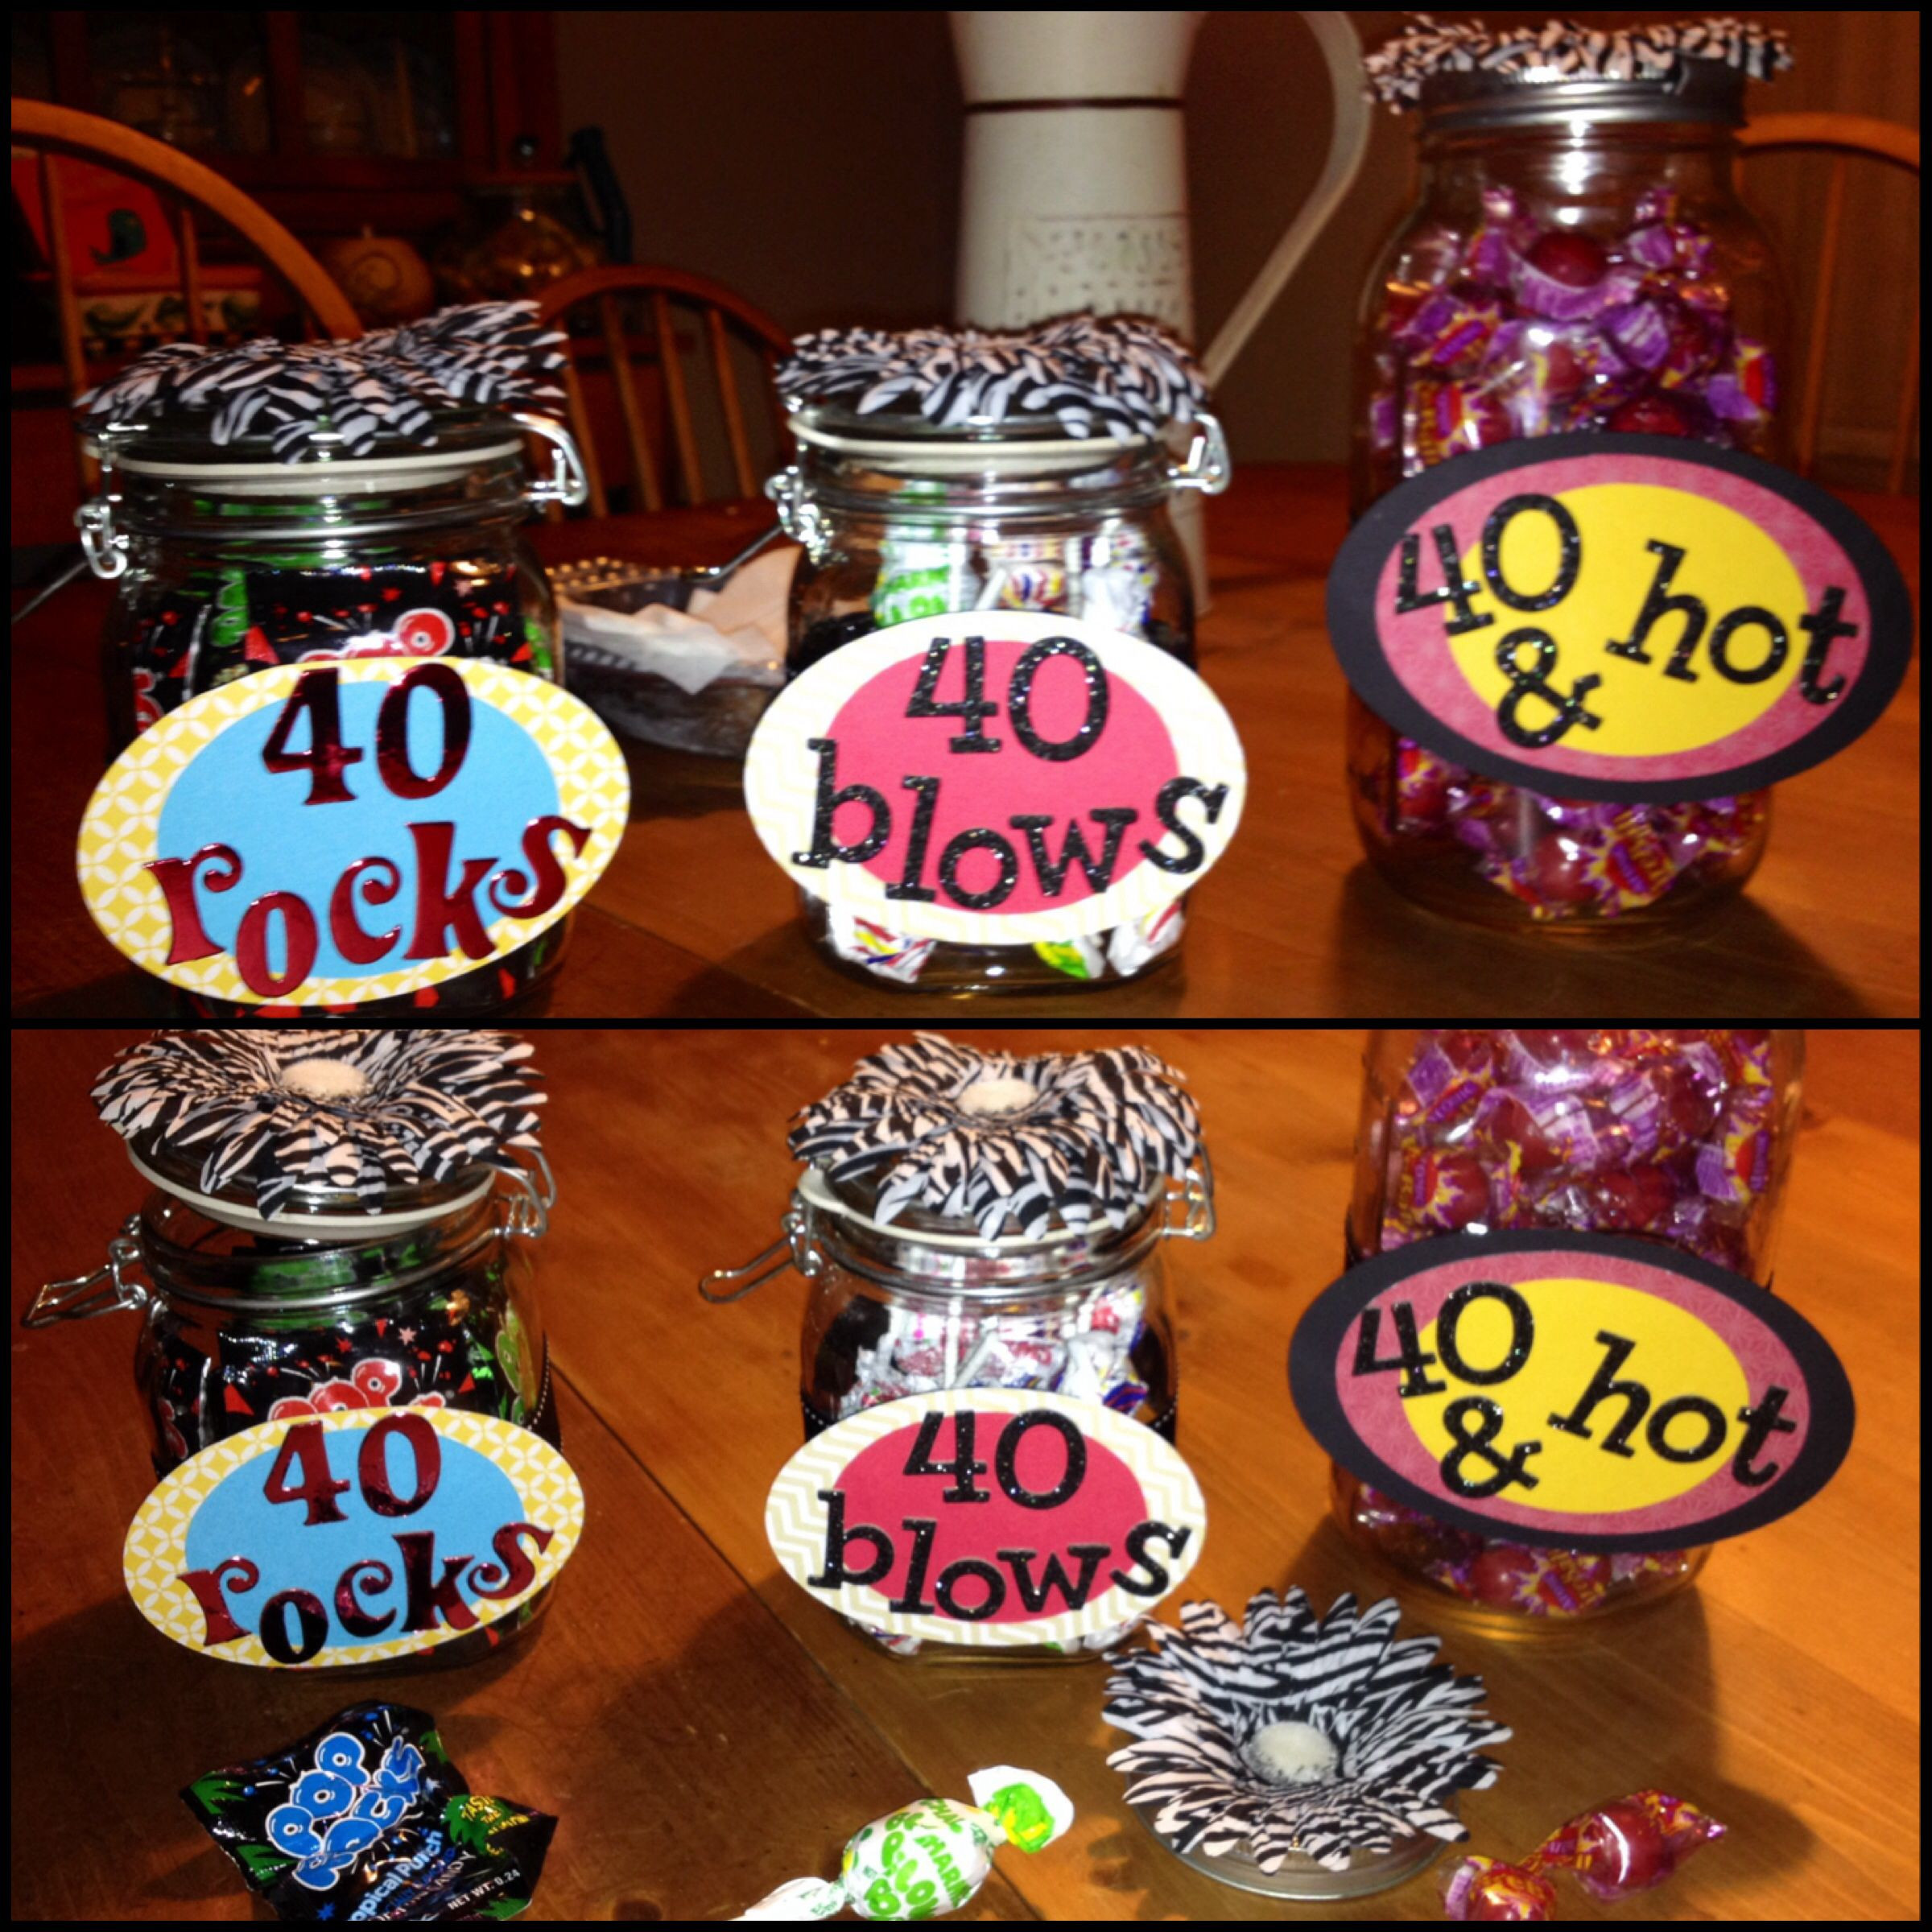 40th Birthday Decorations For Him
 My latest 40th birthday party favors for a BFF 40 Rocks